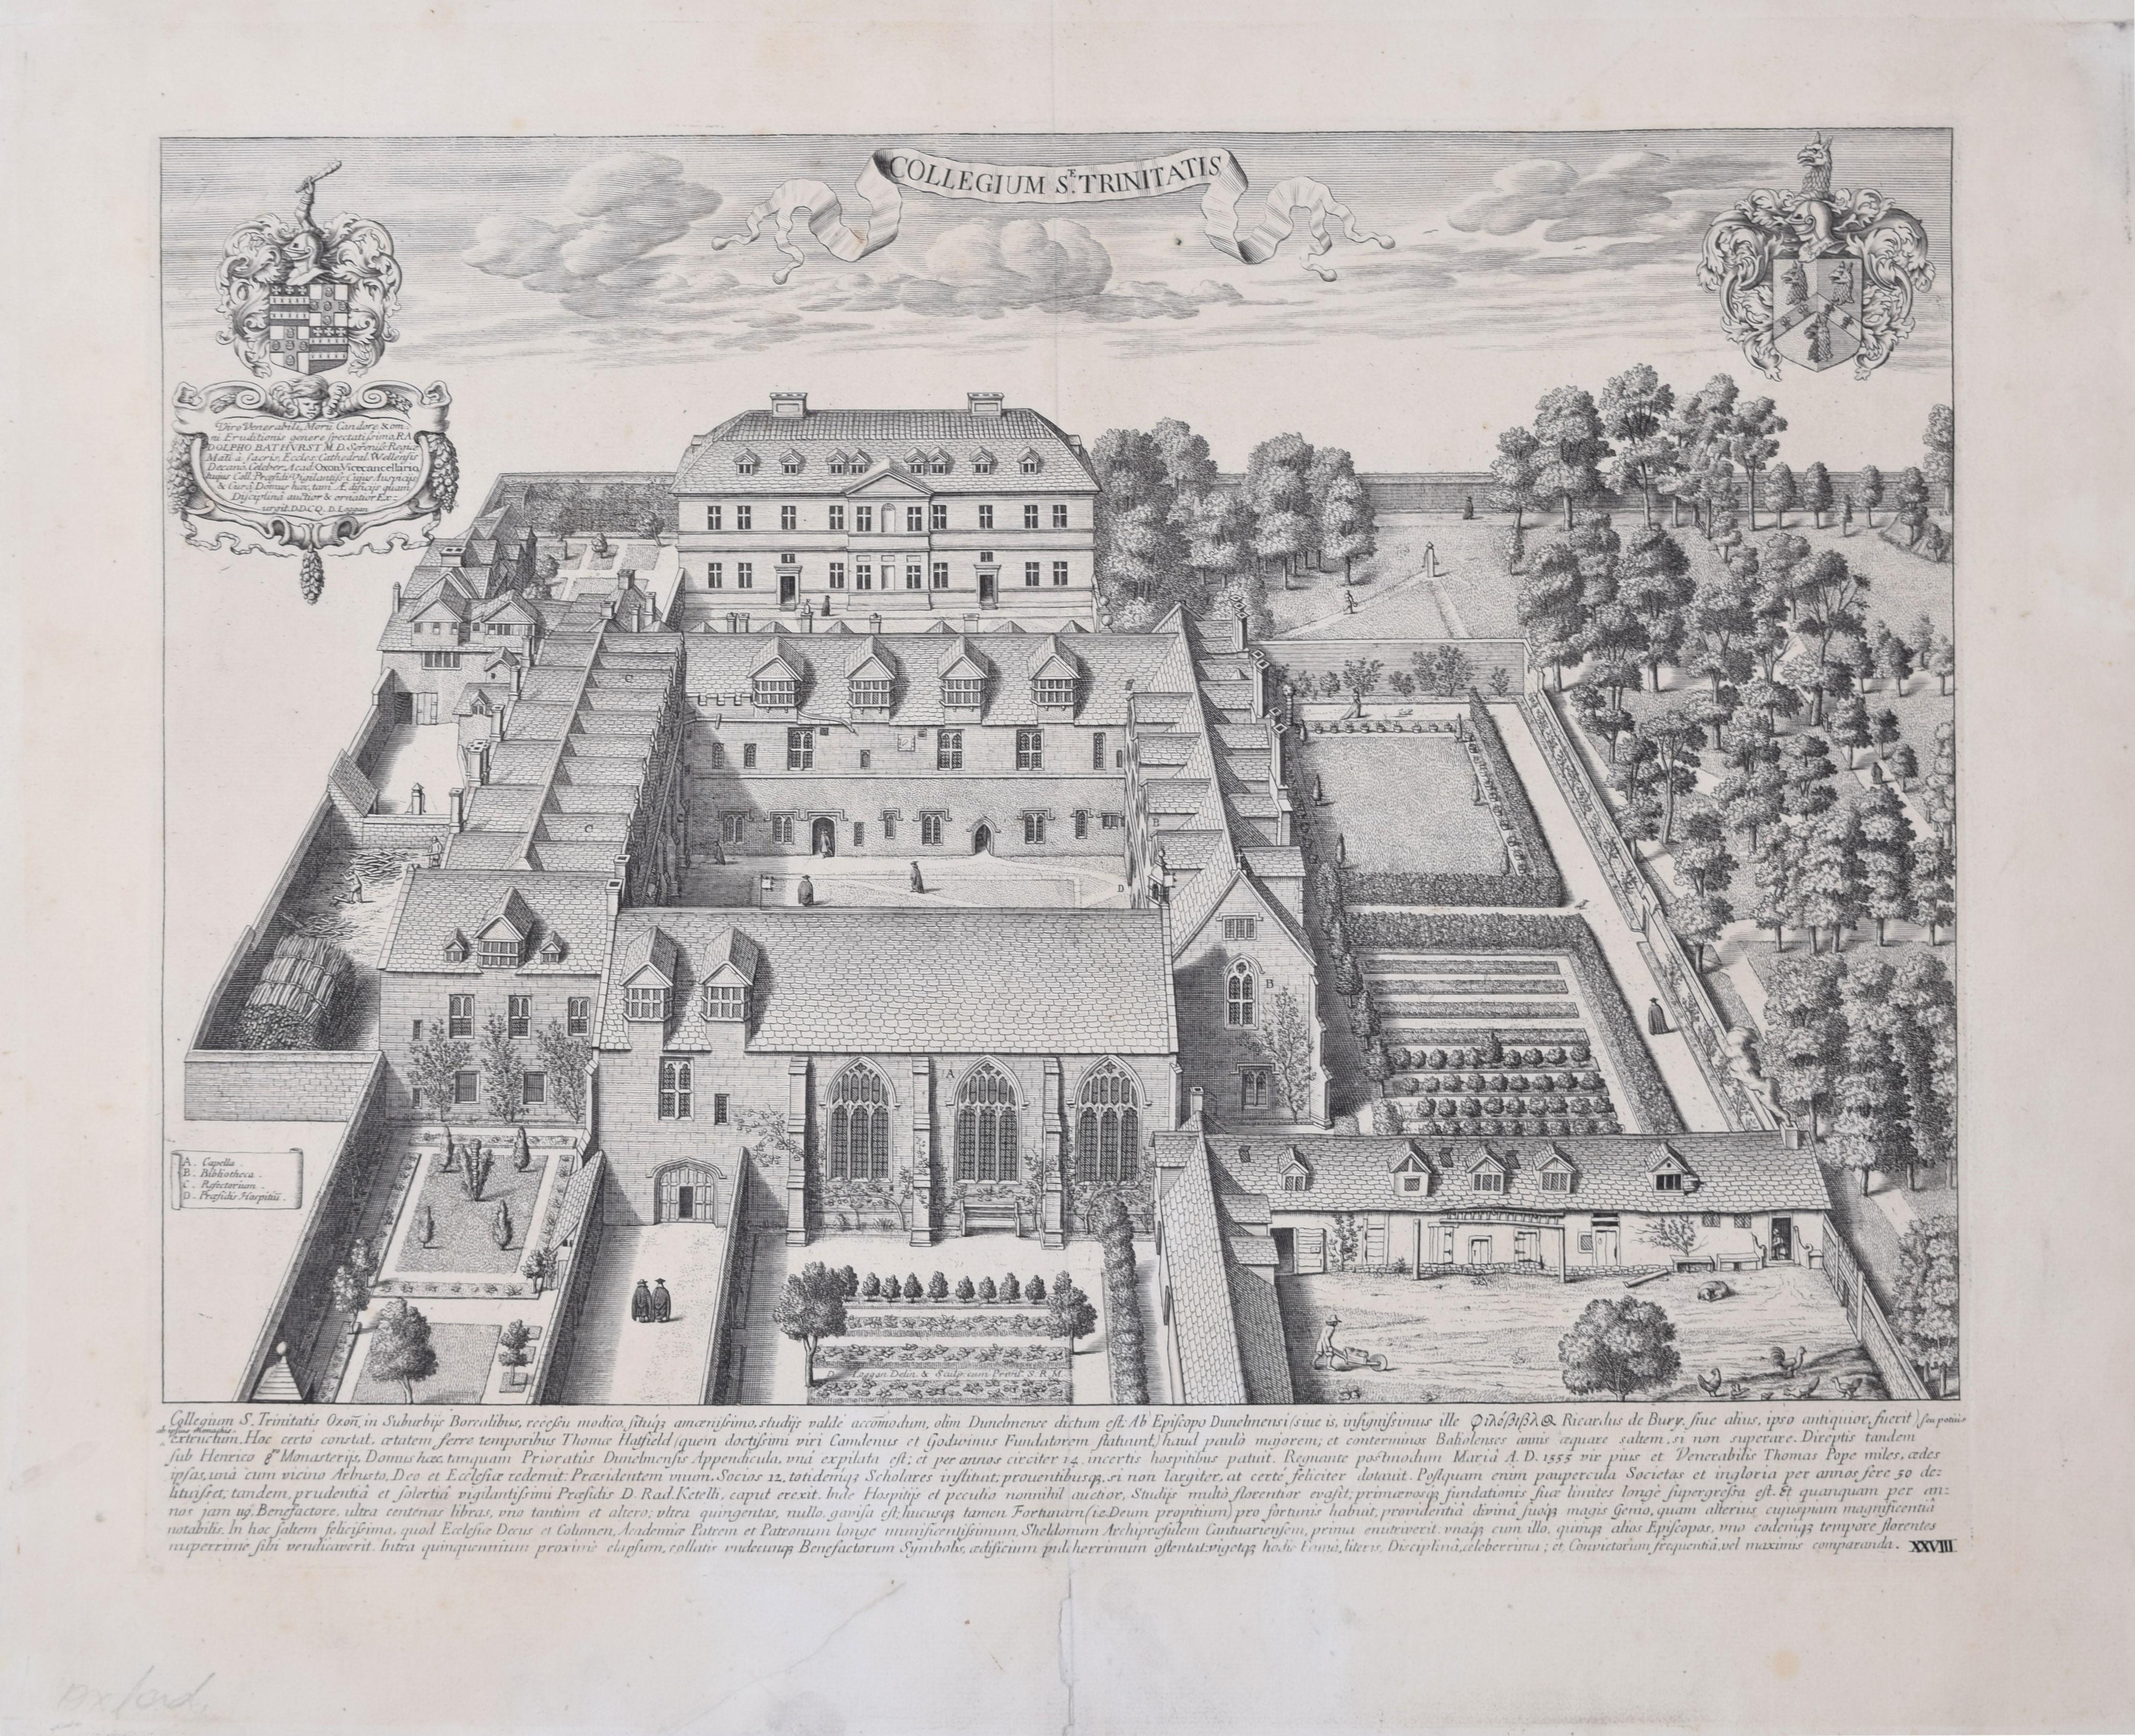 To see our other views of Oxford and Cambridge, scroll down to "More from this Seller" and below it click on "See all from this seller" - or send us a message if you cannot find the view you want.

David Loggan (1634 - 1692)
Trinity College, Oxford